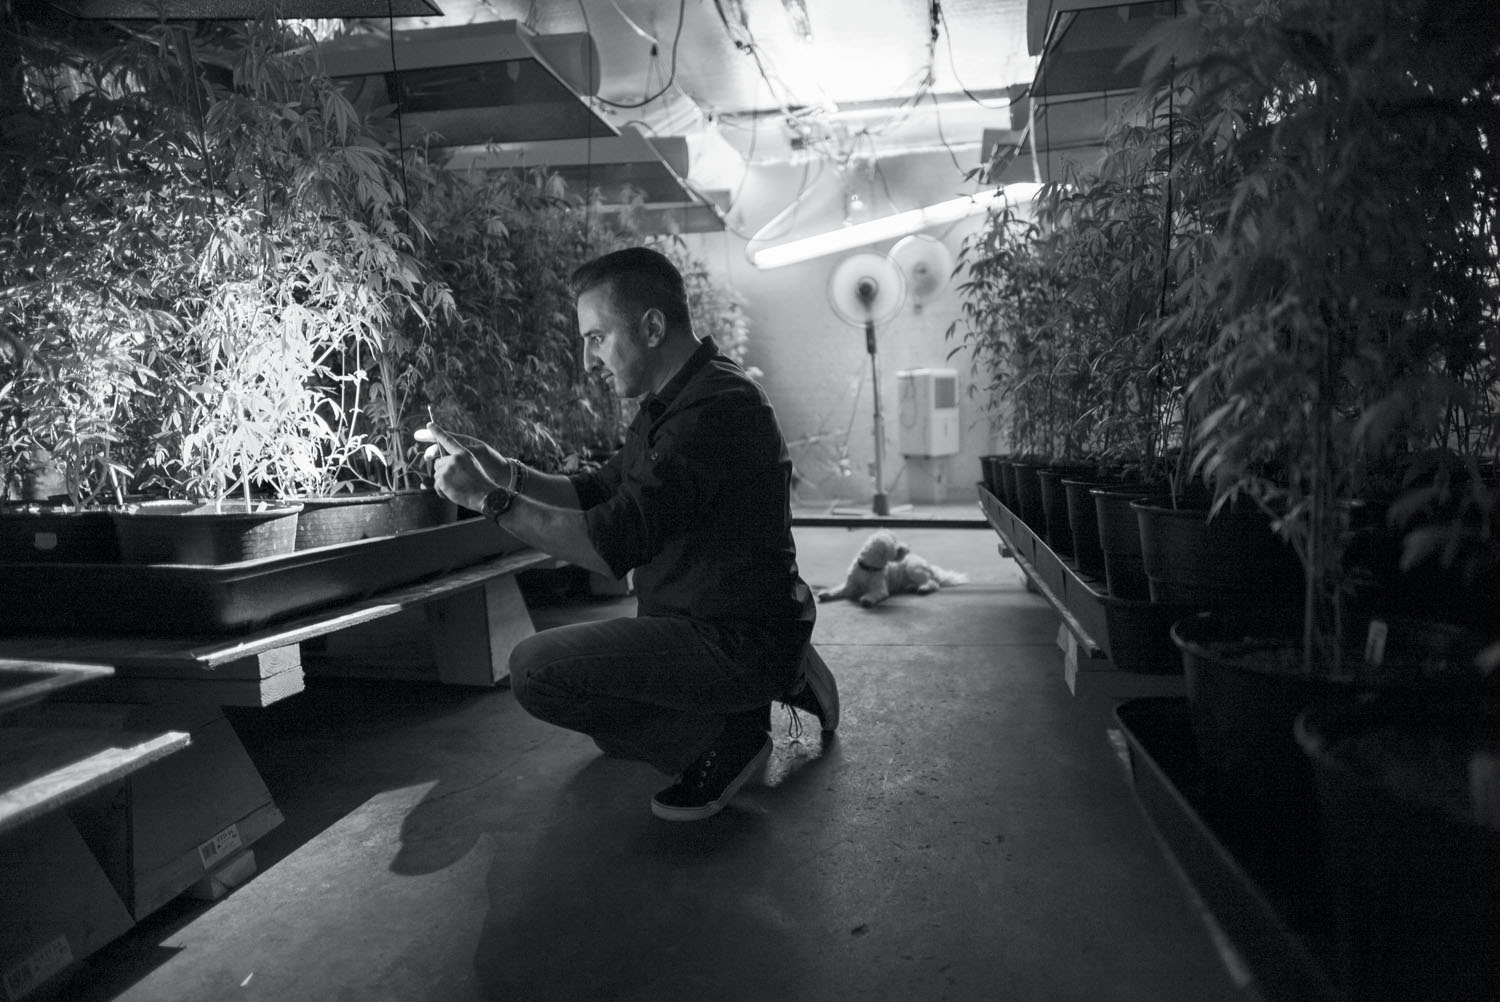 Ray Mirzabegian in his grow room. North Hollywood, CA, February 2015.